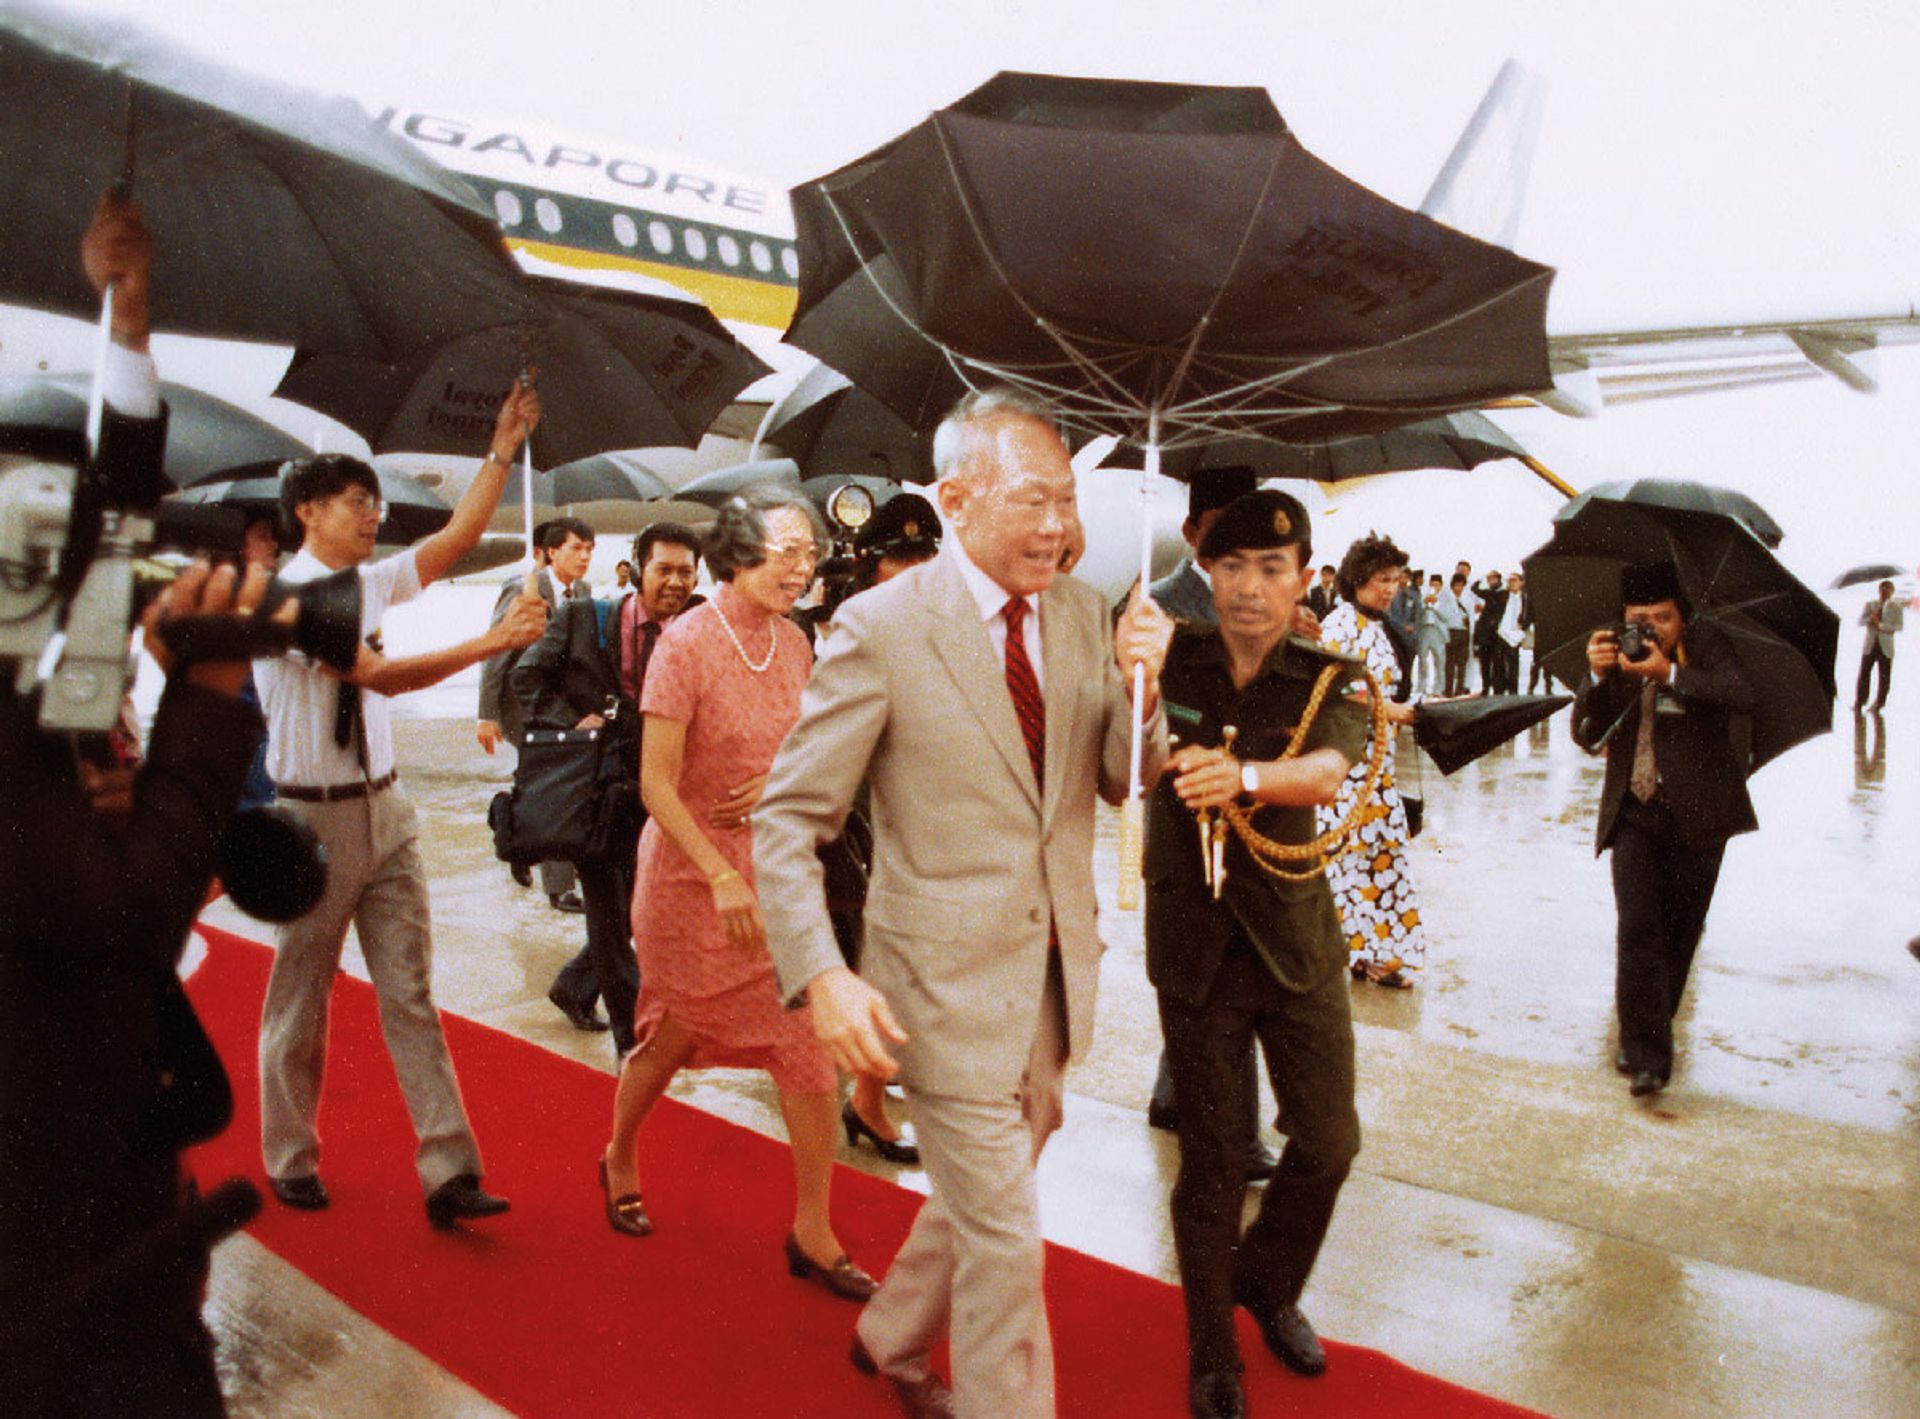 No raining on his parade: Mr Lee smiling as his umbrella proves no match against the stormy weather that greeted him and Mrs Lee on their arrival in Brunei in August 1986. Source: Lee Kuan Yew